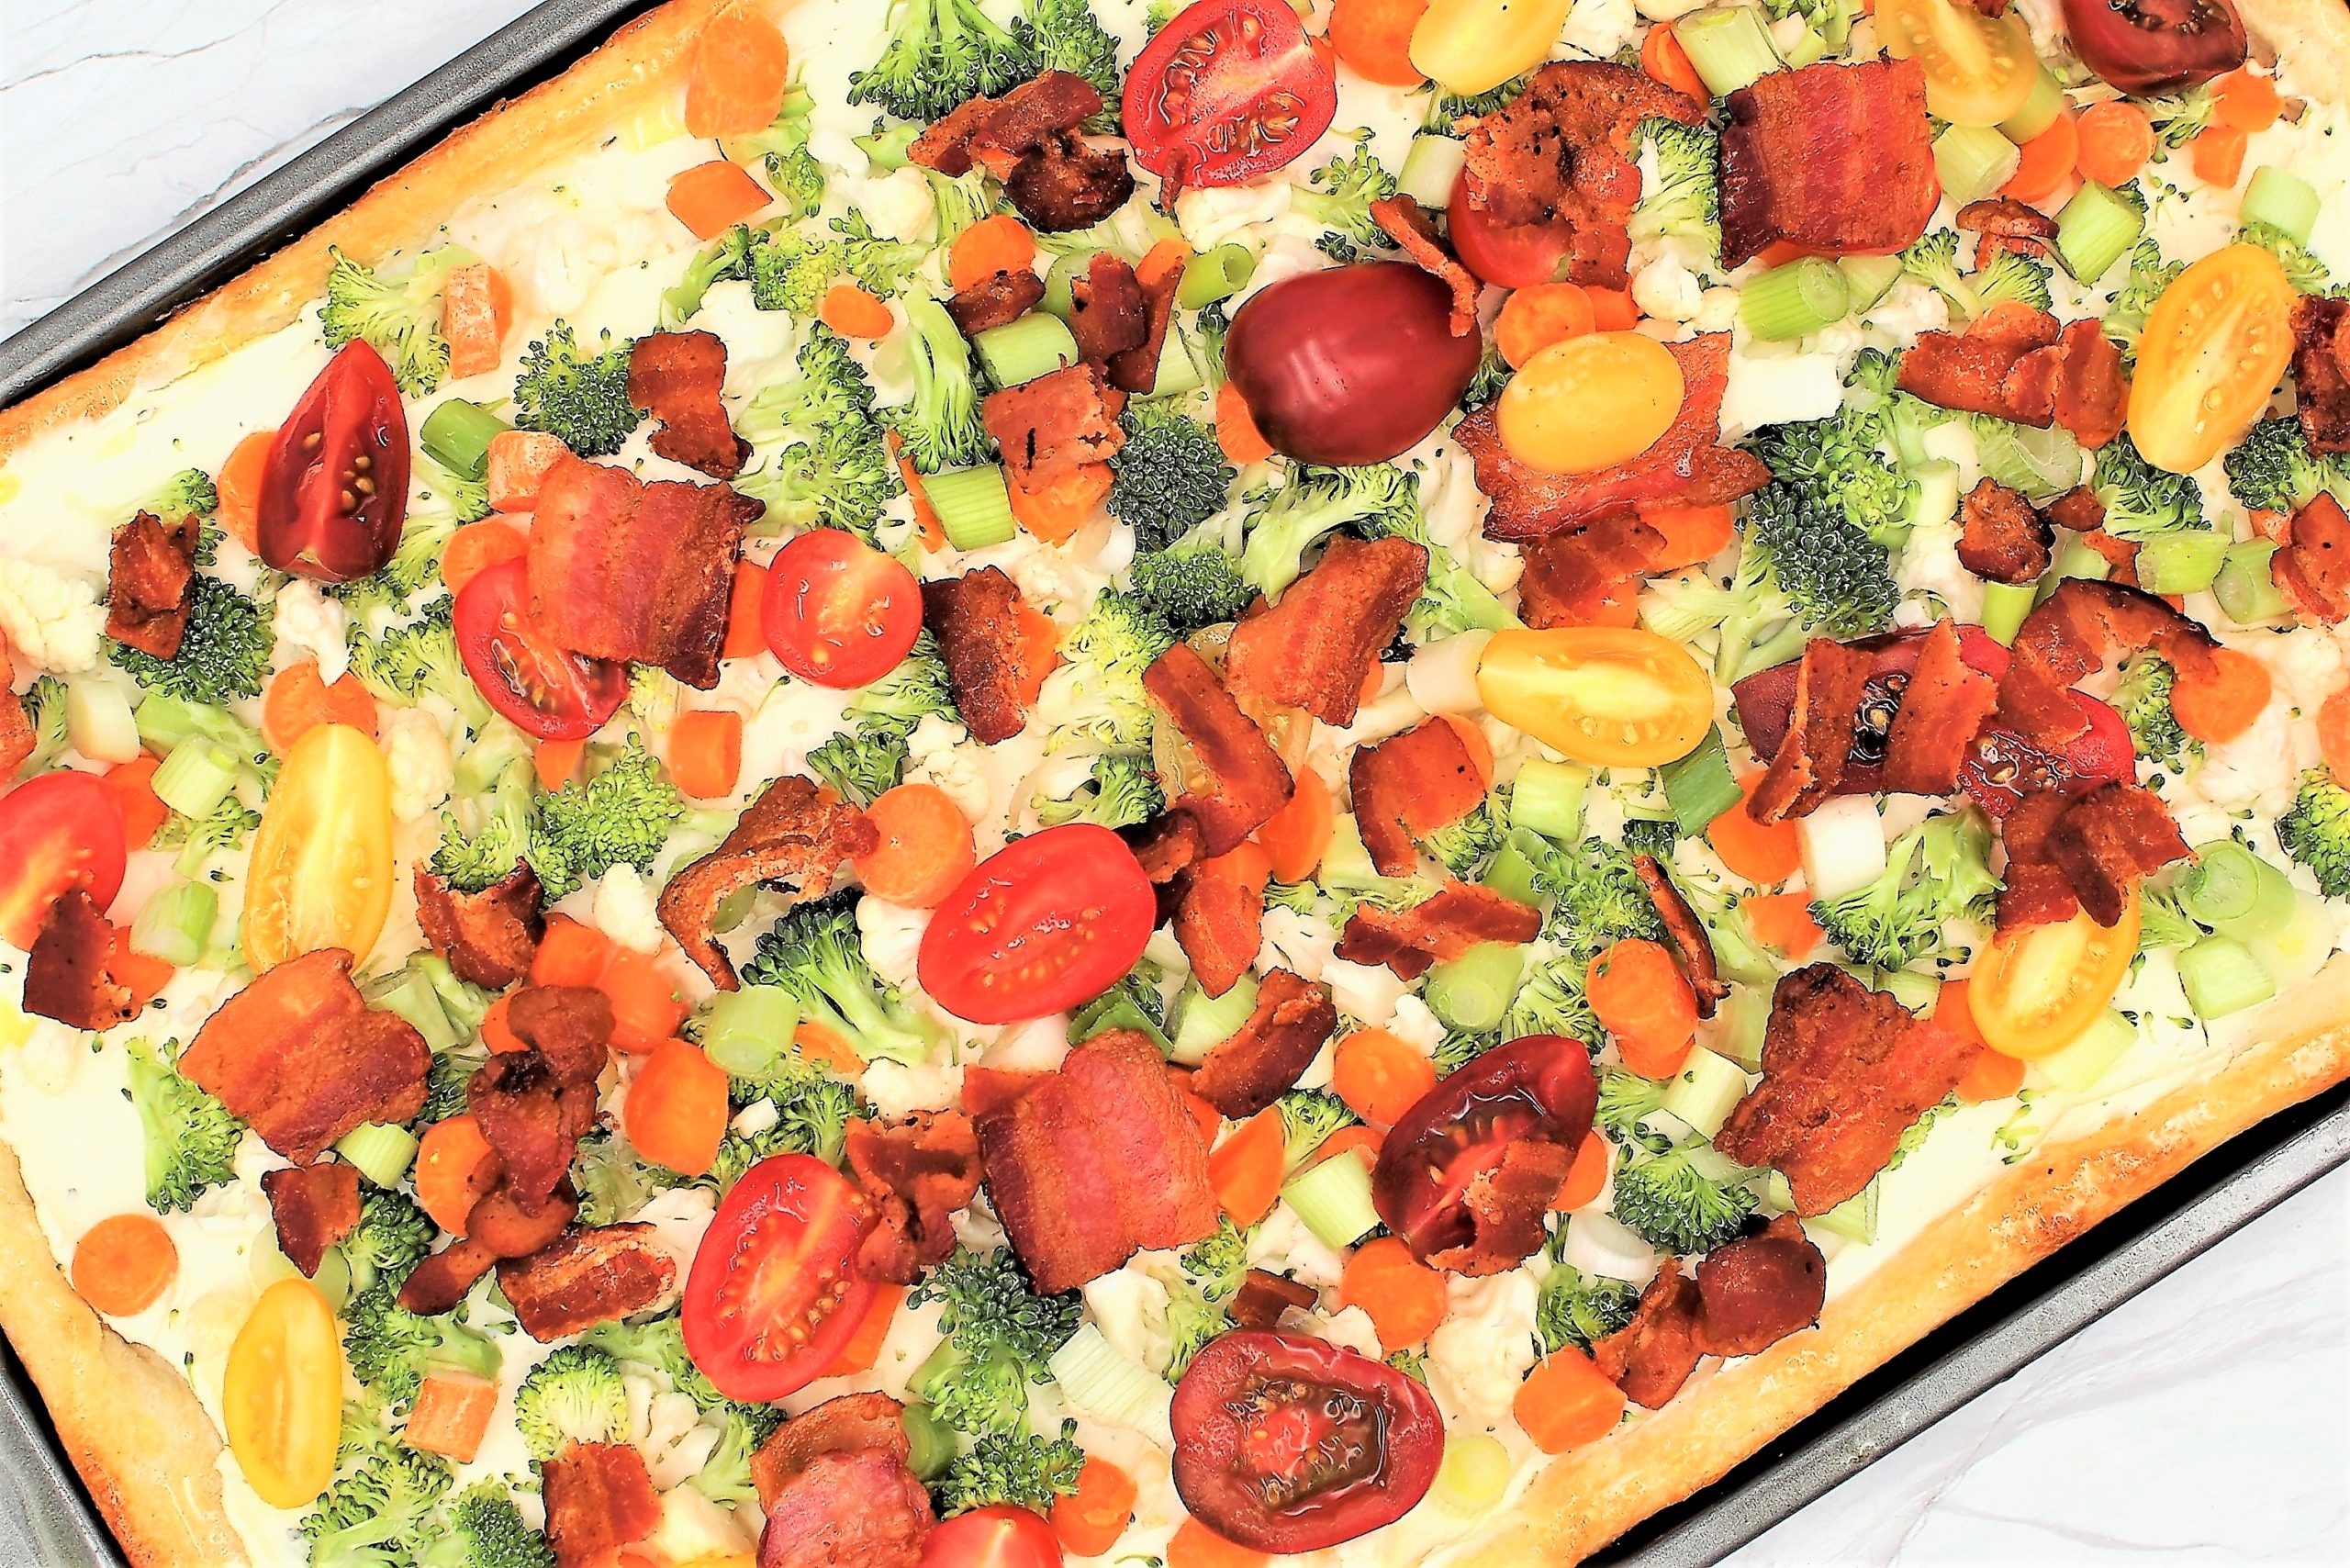 Vegetable, Bacon, and Cream Cheese Croissant Pizza